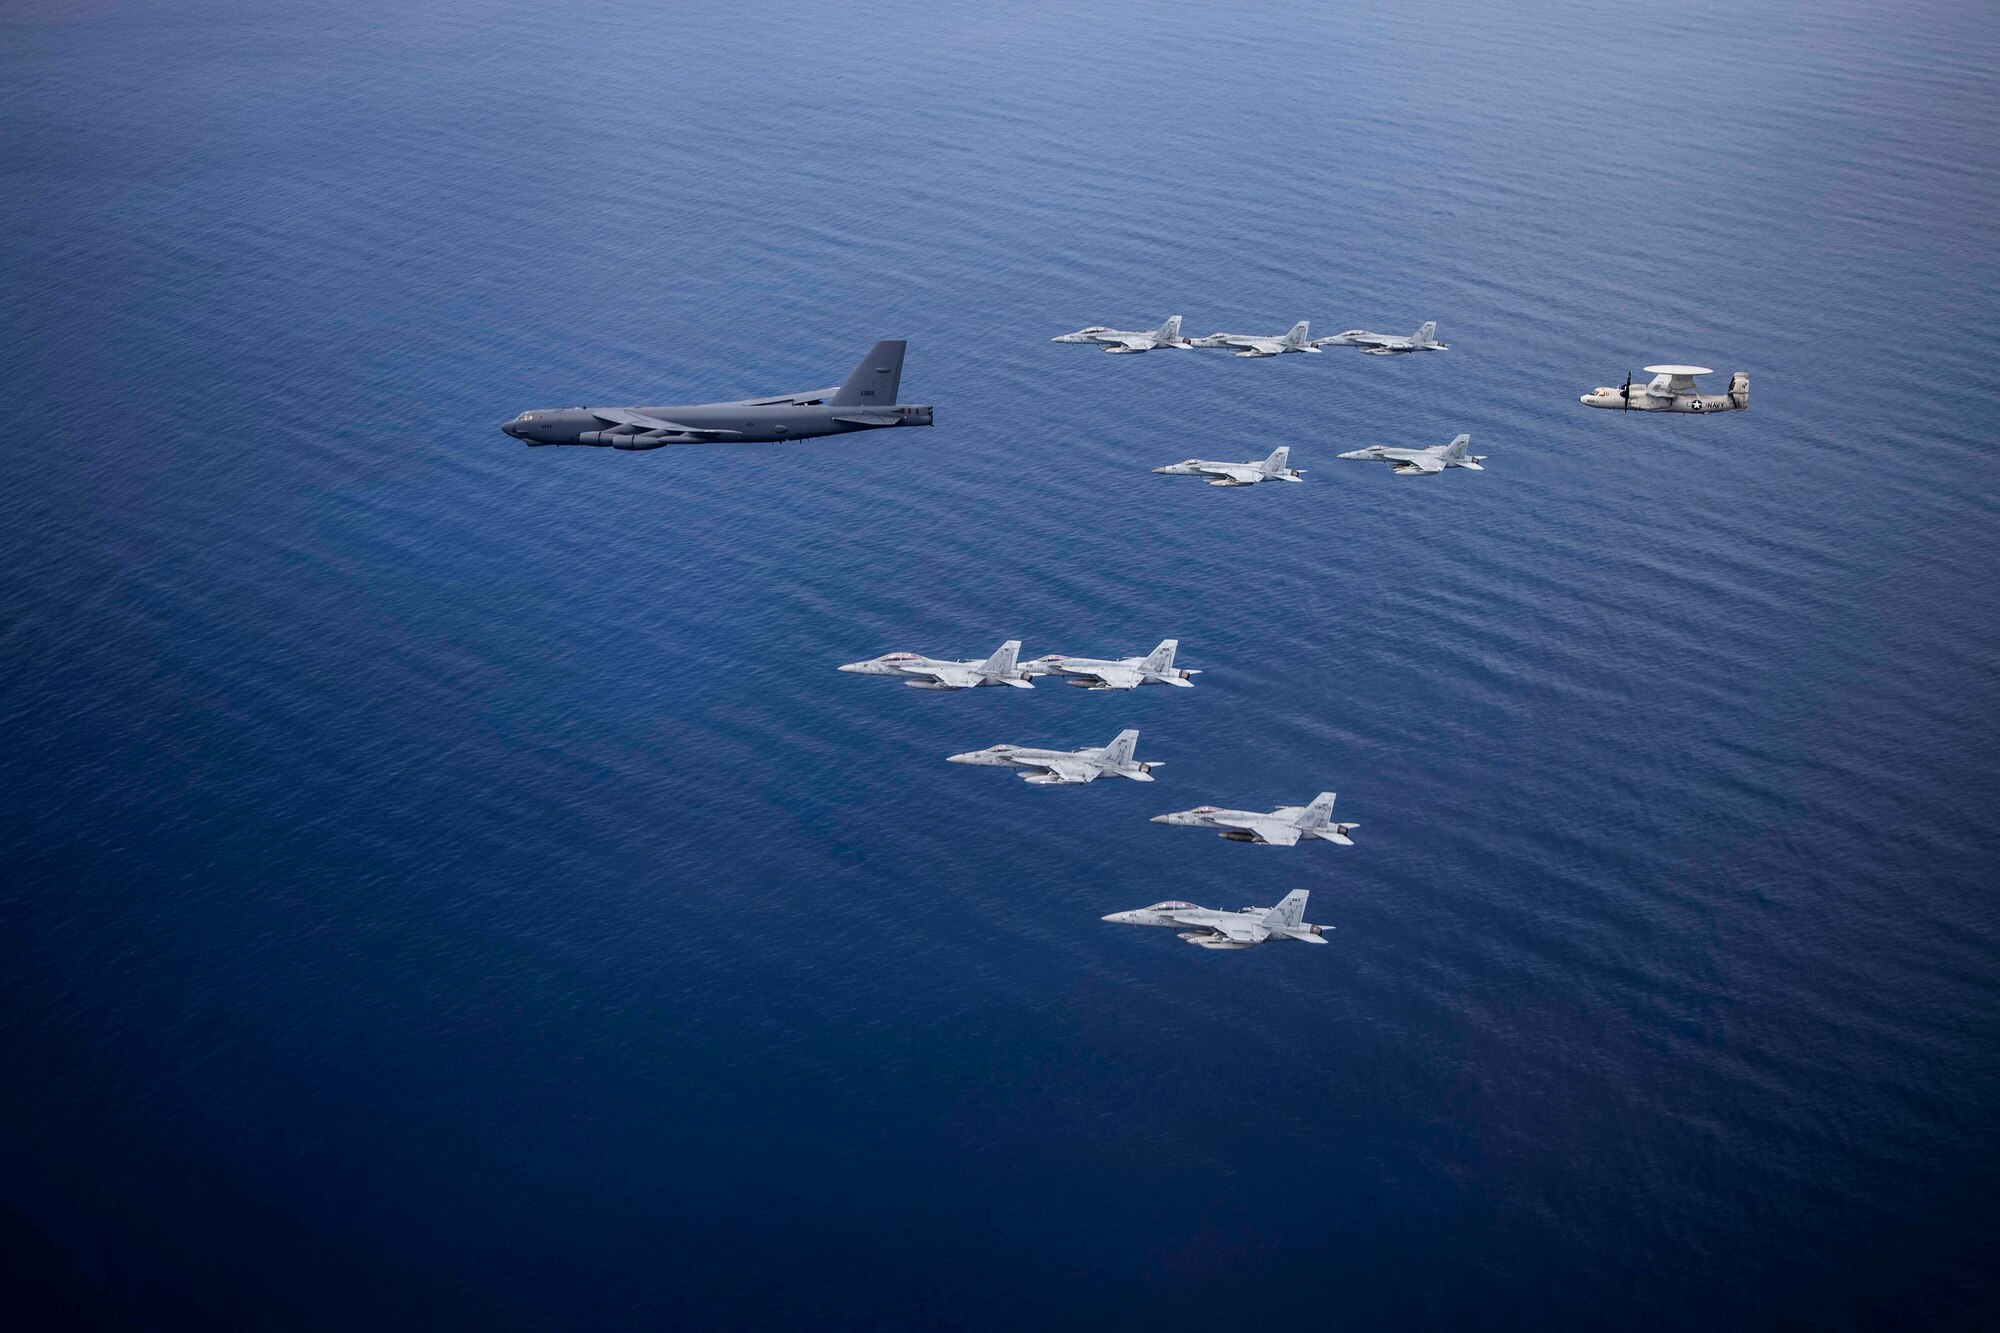 Aircraft from the Nimitz Carrier Strike Force and a B-52 Bomber from Barksdale Air Force base conduct integrated joint air operations in support of a free and open Indo-Pacific. The USS Nimitz (CVN 68) and USS Ronald Reagan (CVN 76) Carrier Strike Groups are conducting dual-carrier operations in the South China Sea as the Nimitz Carrier Strike Force. (U.S. Navy photo by Lt. Cmdr. Joseph Stephens)